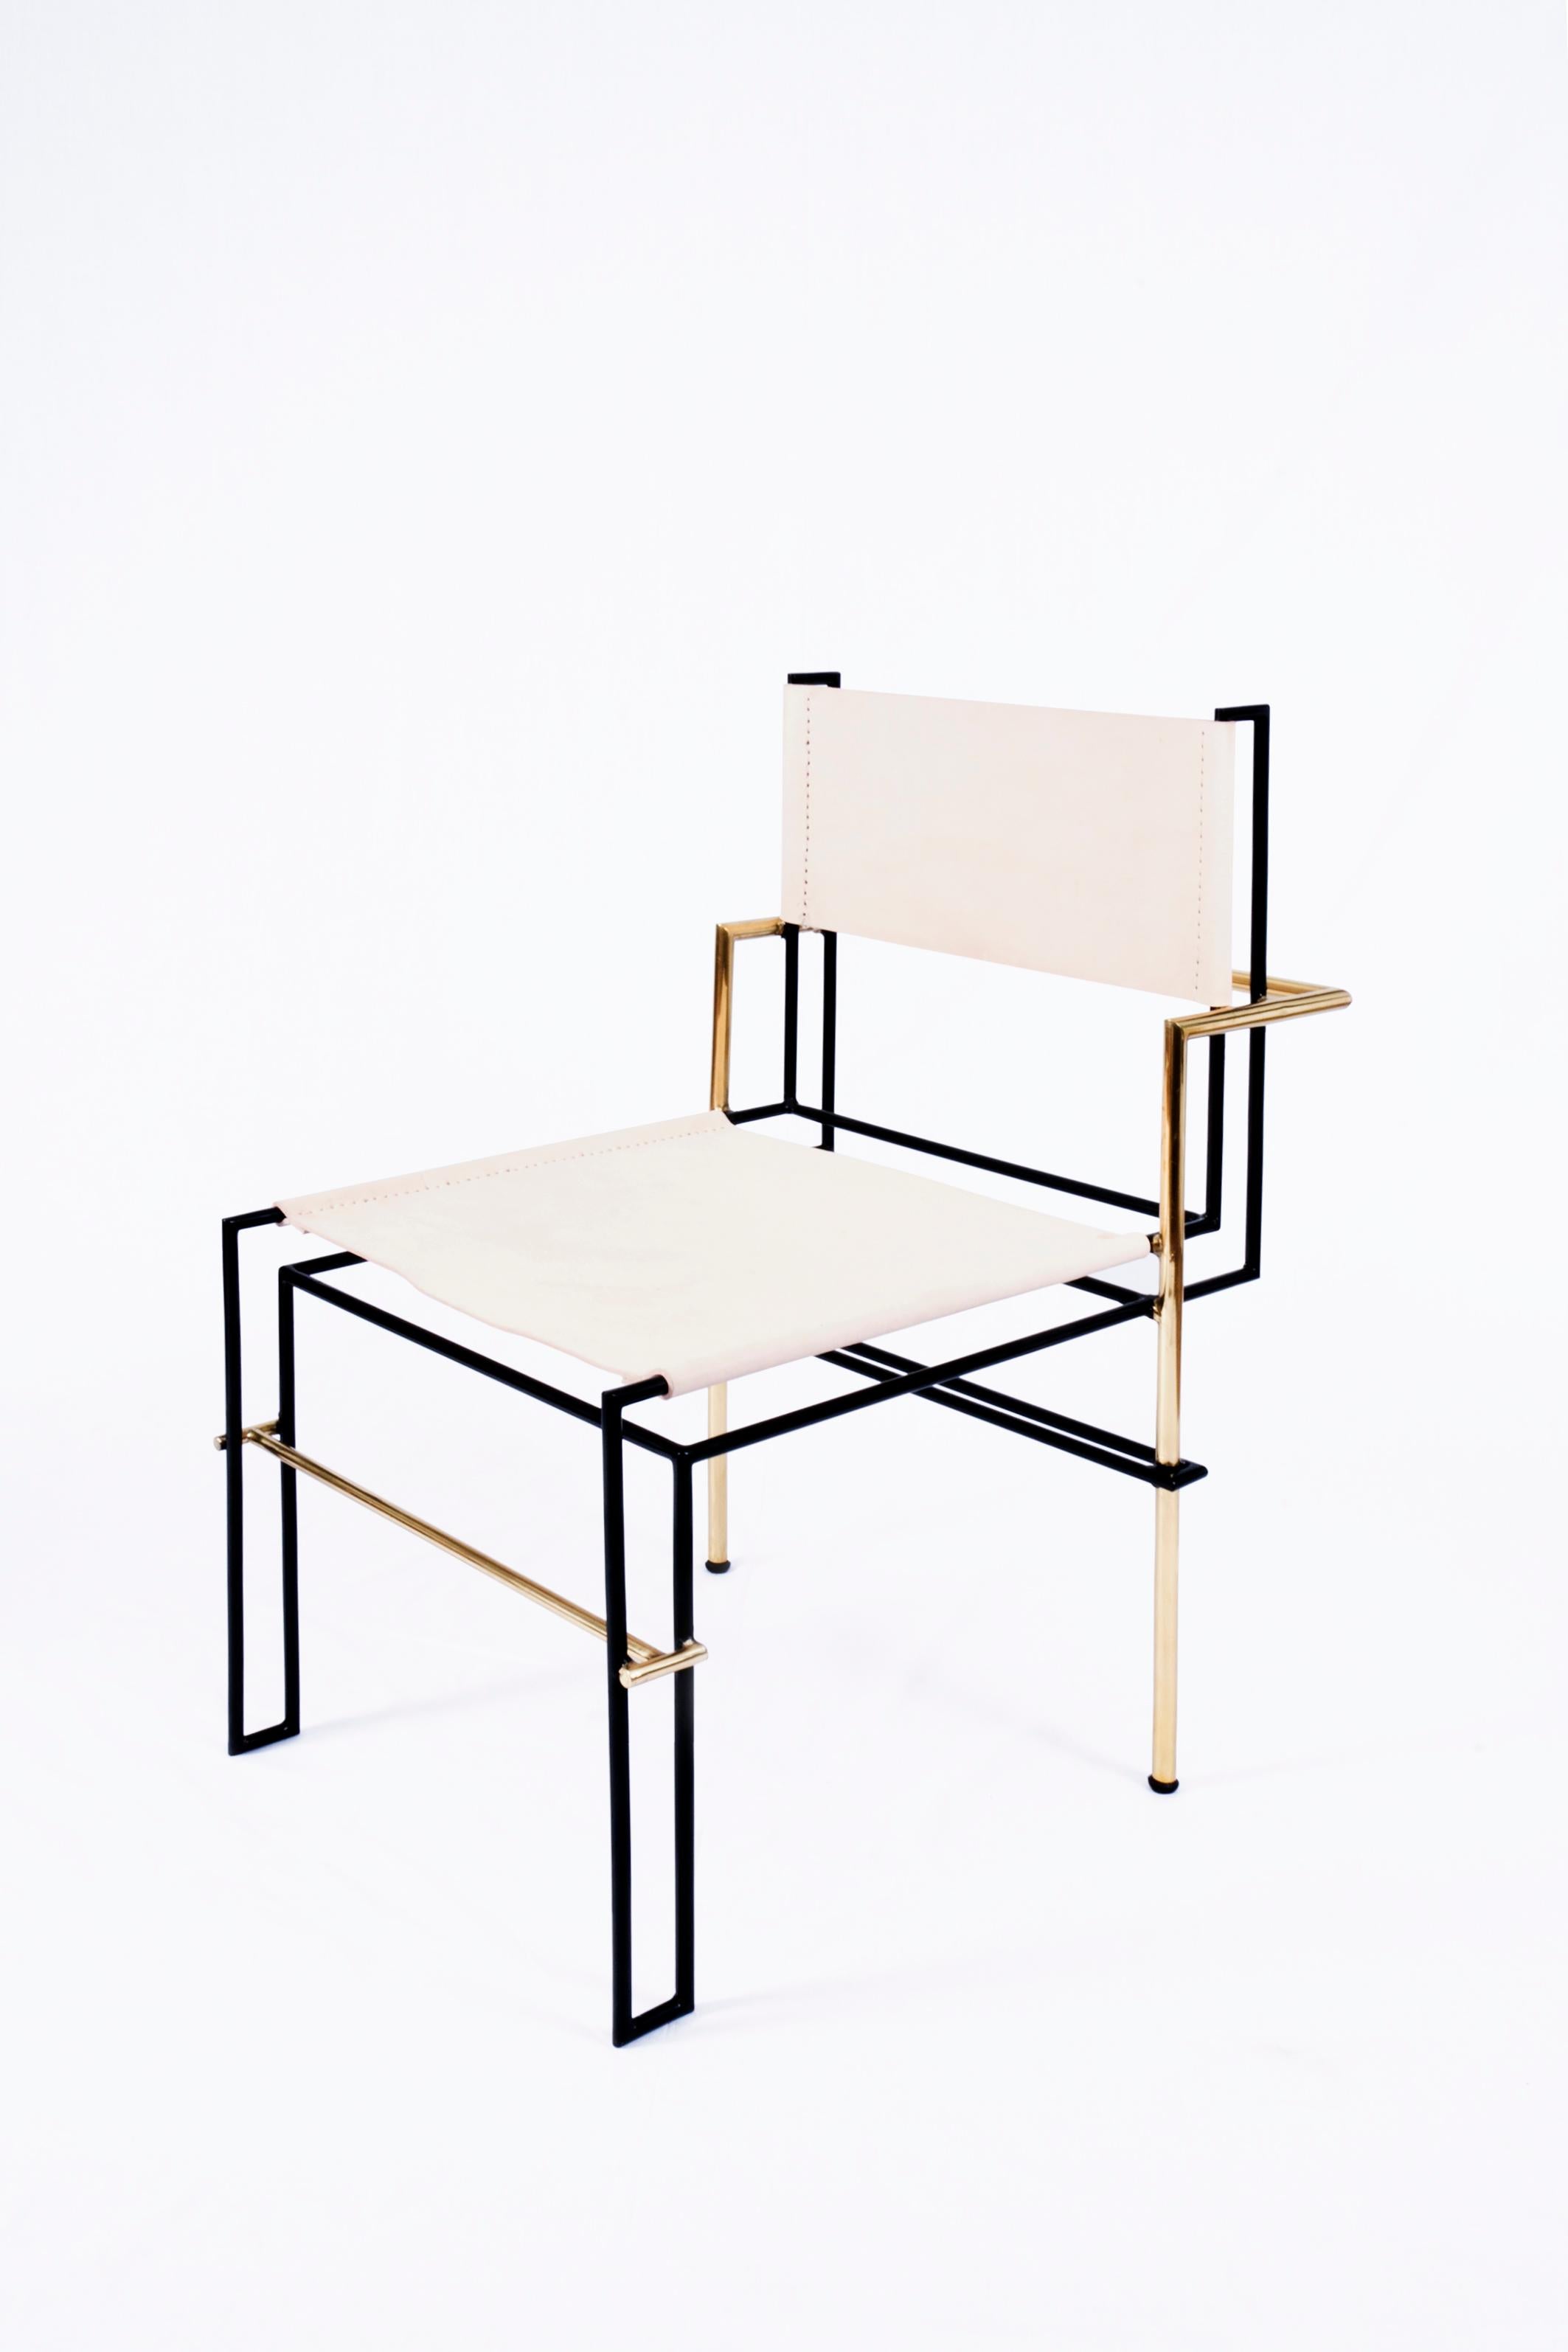 Casbah brass chair black by Nomade Atelier
Dimensions: D94 x W 75 x H107 cm
Material: Brass, leather.
Available in black or White leather. For others finishes,

The Casbah chair, inspired by Laszlo Moholy-Nagy's photograms, is all linear balance,